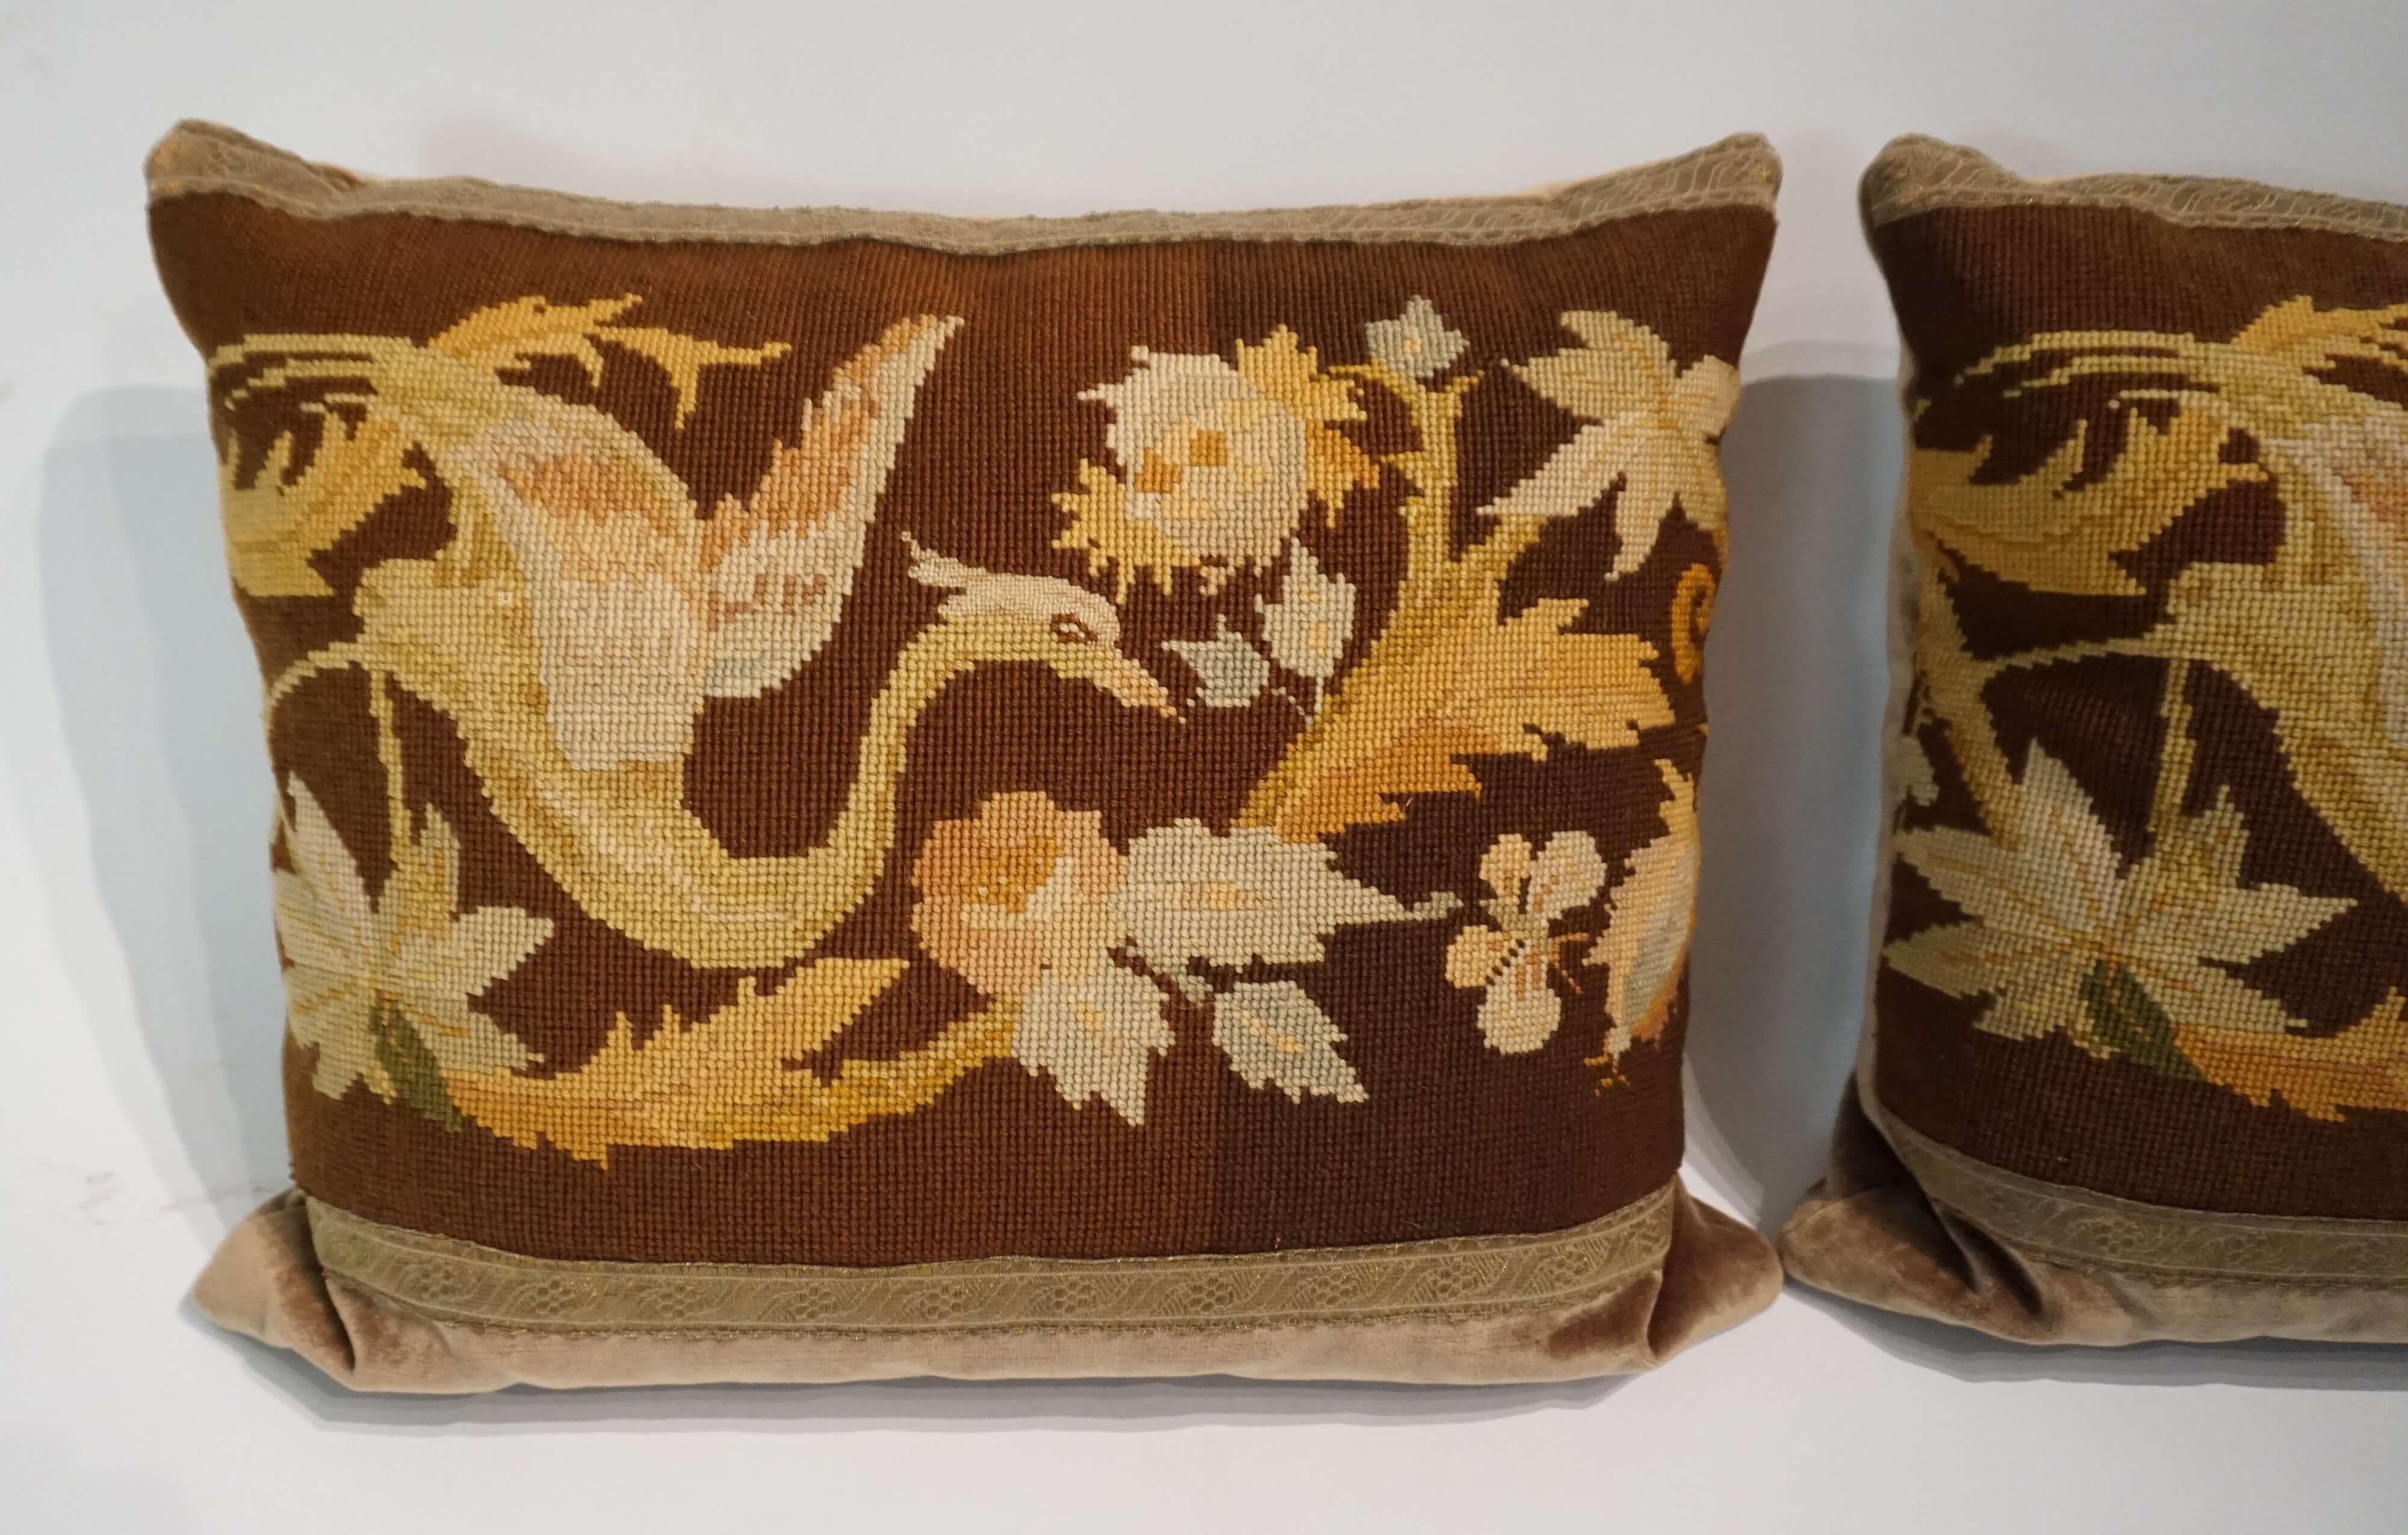 Beautiful pair of newly made pillows or cushions having antique circa 1860 English Berlin wool work embroidered fronts with foliate, 'ho ho bird', and butterfly pattern with antique metallic gold passementerie trim borders on cotton strie velvet.